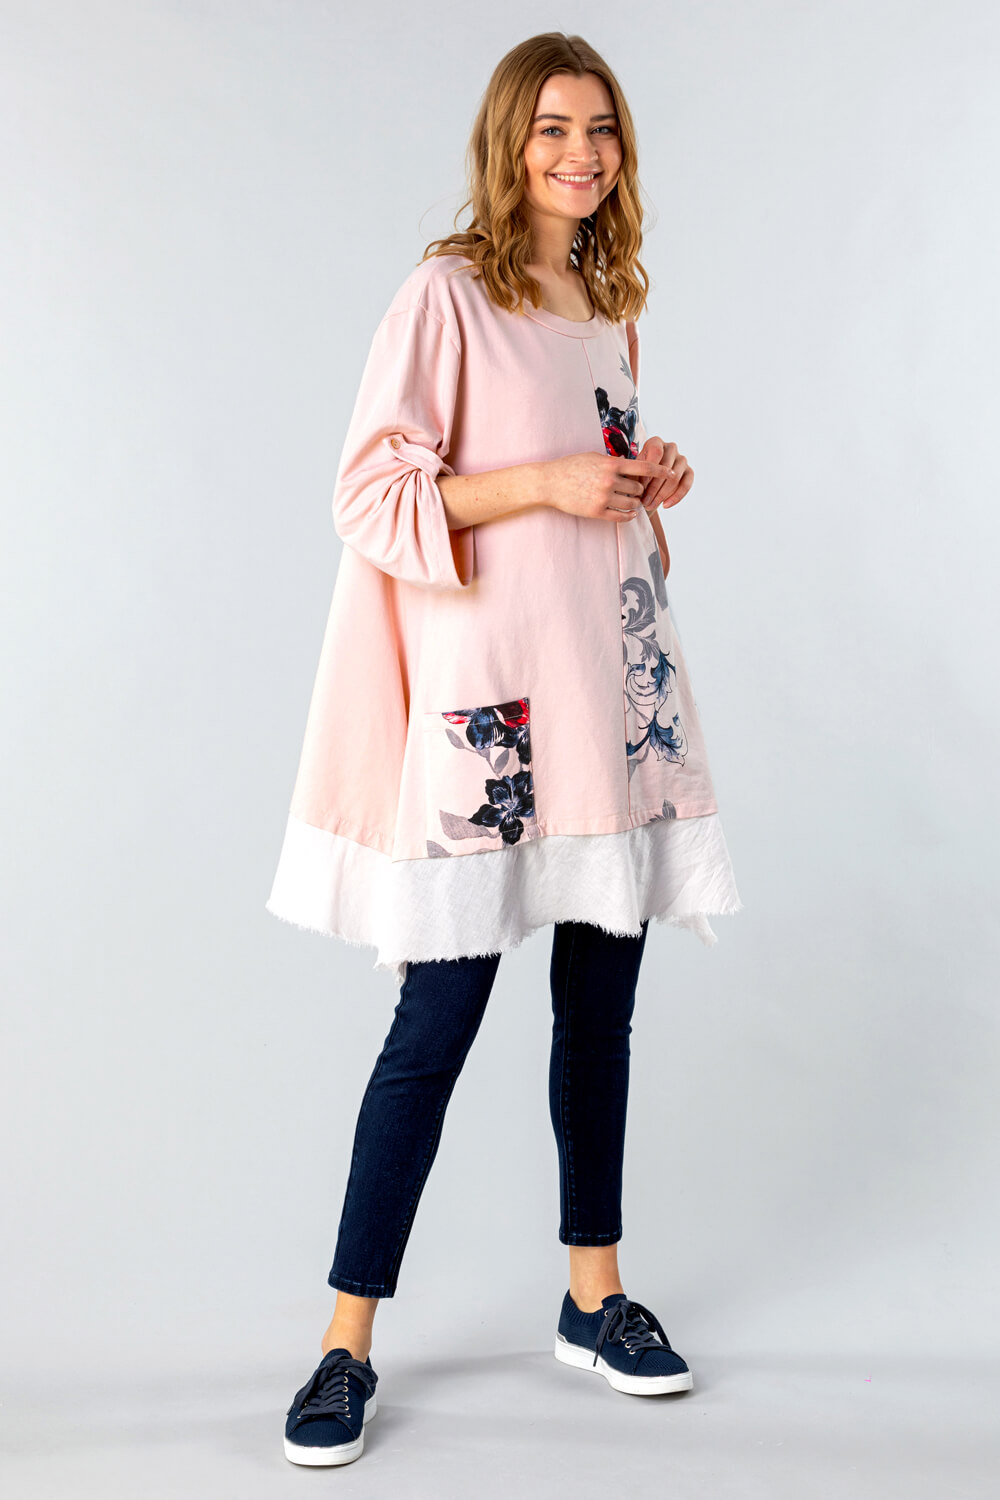 PINK Floral Slouchy Pocket Tunic Top, Image 3 of 4